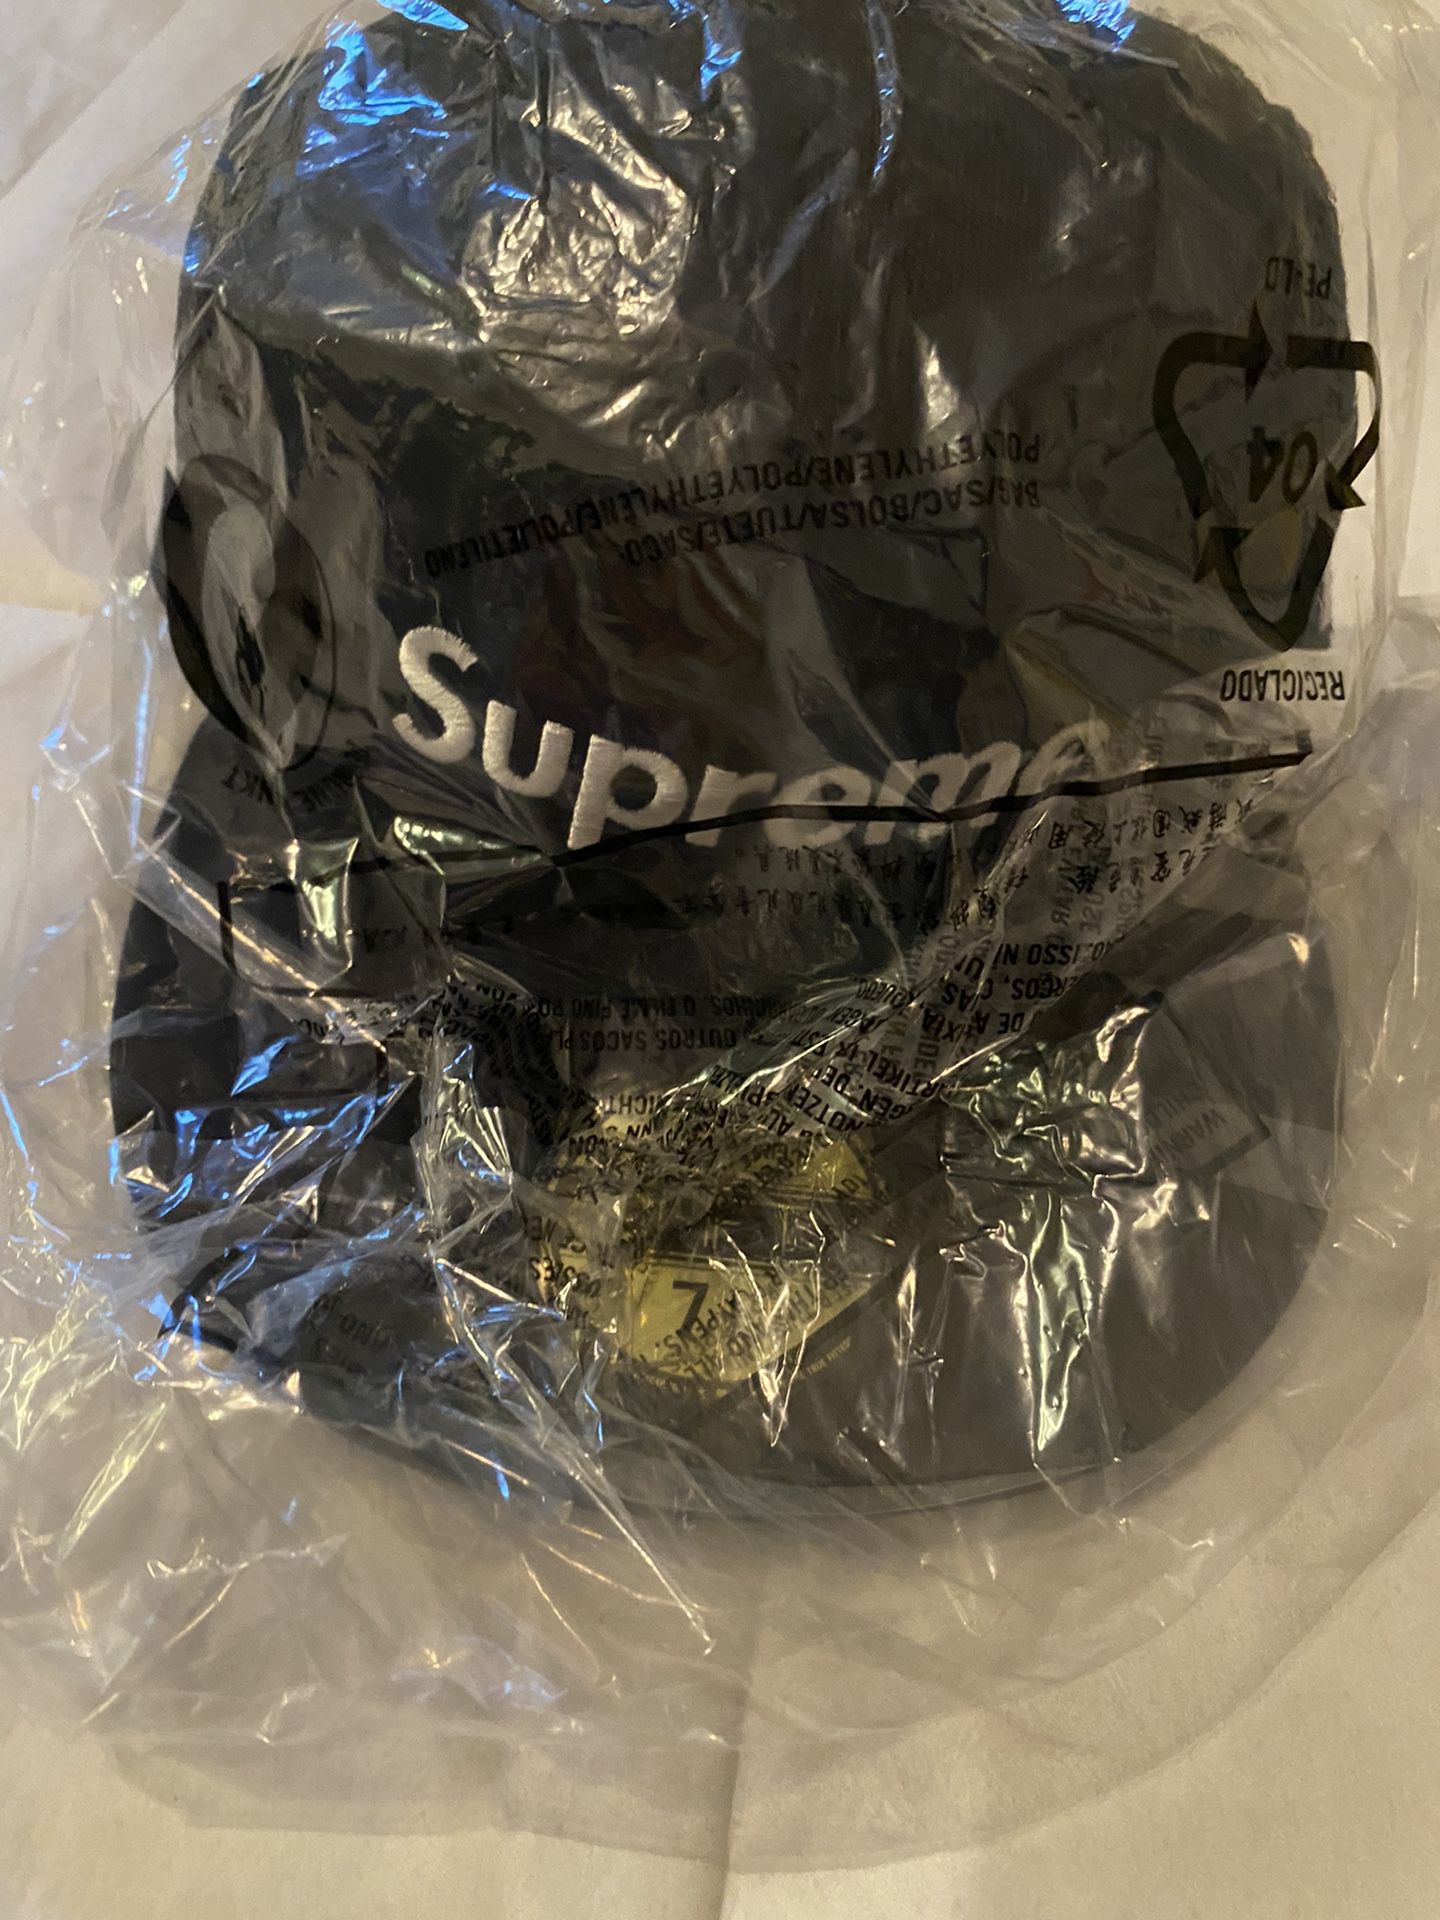 BRAND NEW SUPREME/NEW ERA ”NY YANKEE BOX LOGO NAVY” FITTED FOR SALE!!! SIZE 7/14 $80